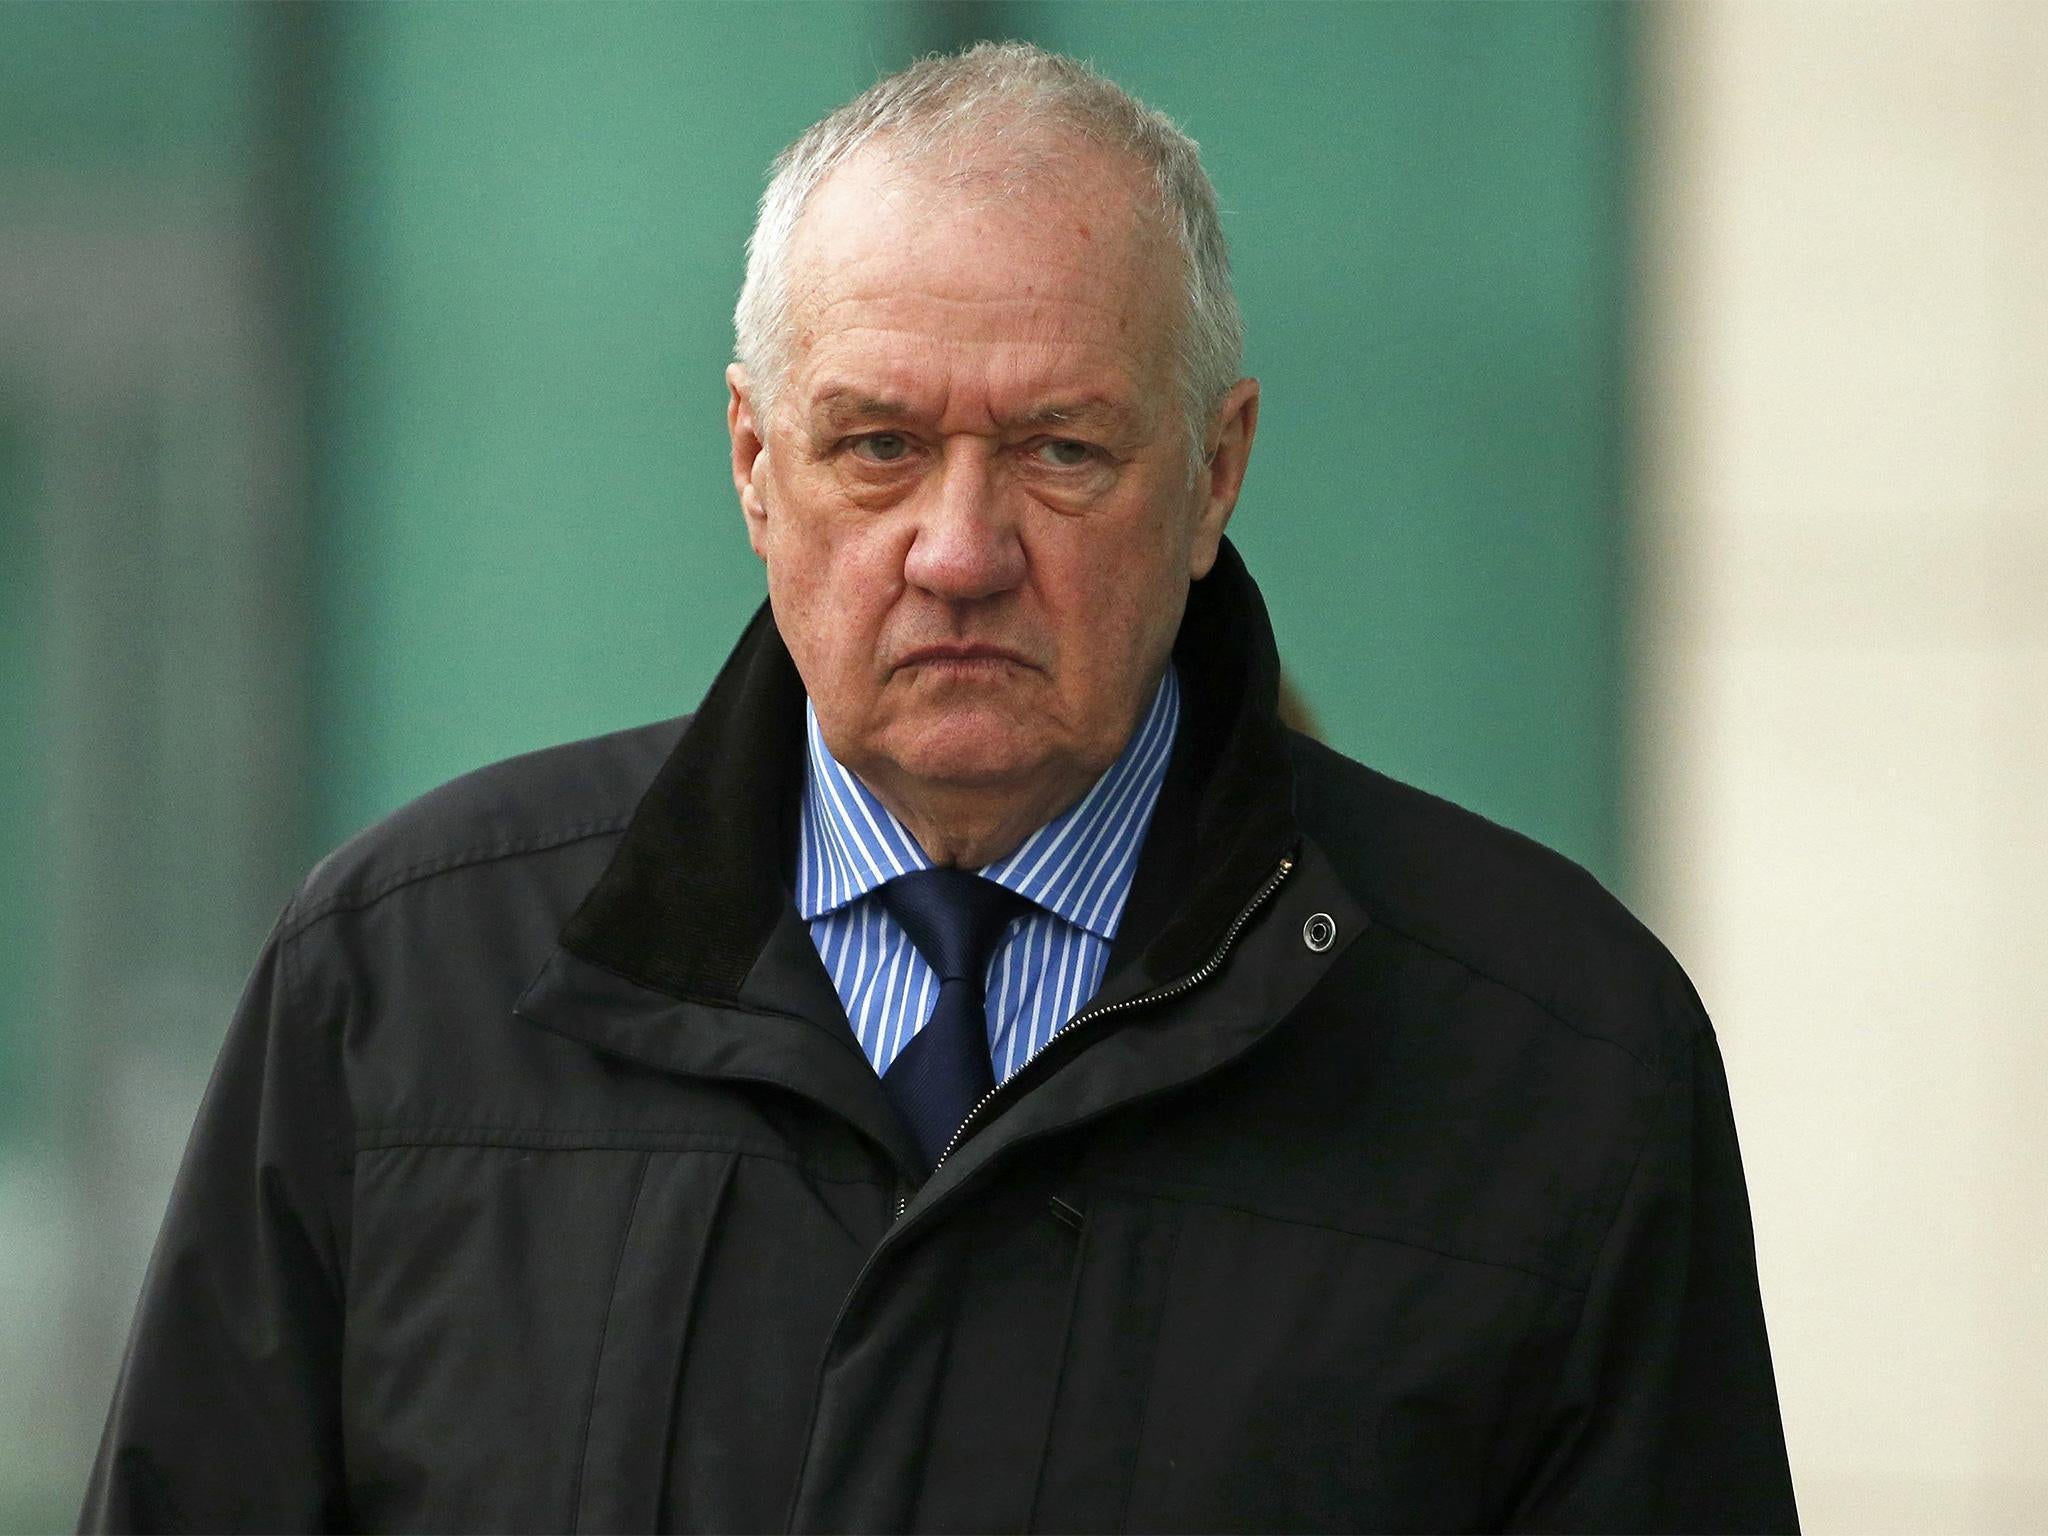 Former Chief Superintendent David Duckenfield told the inquest he was a Freemason